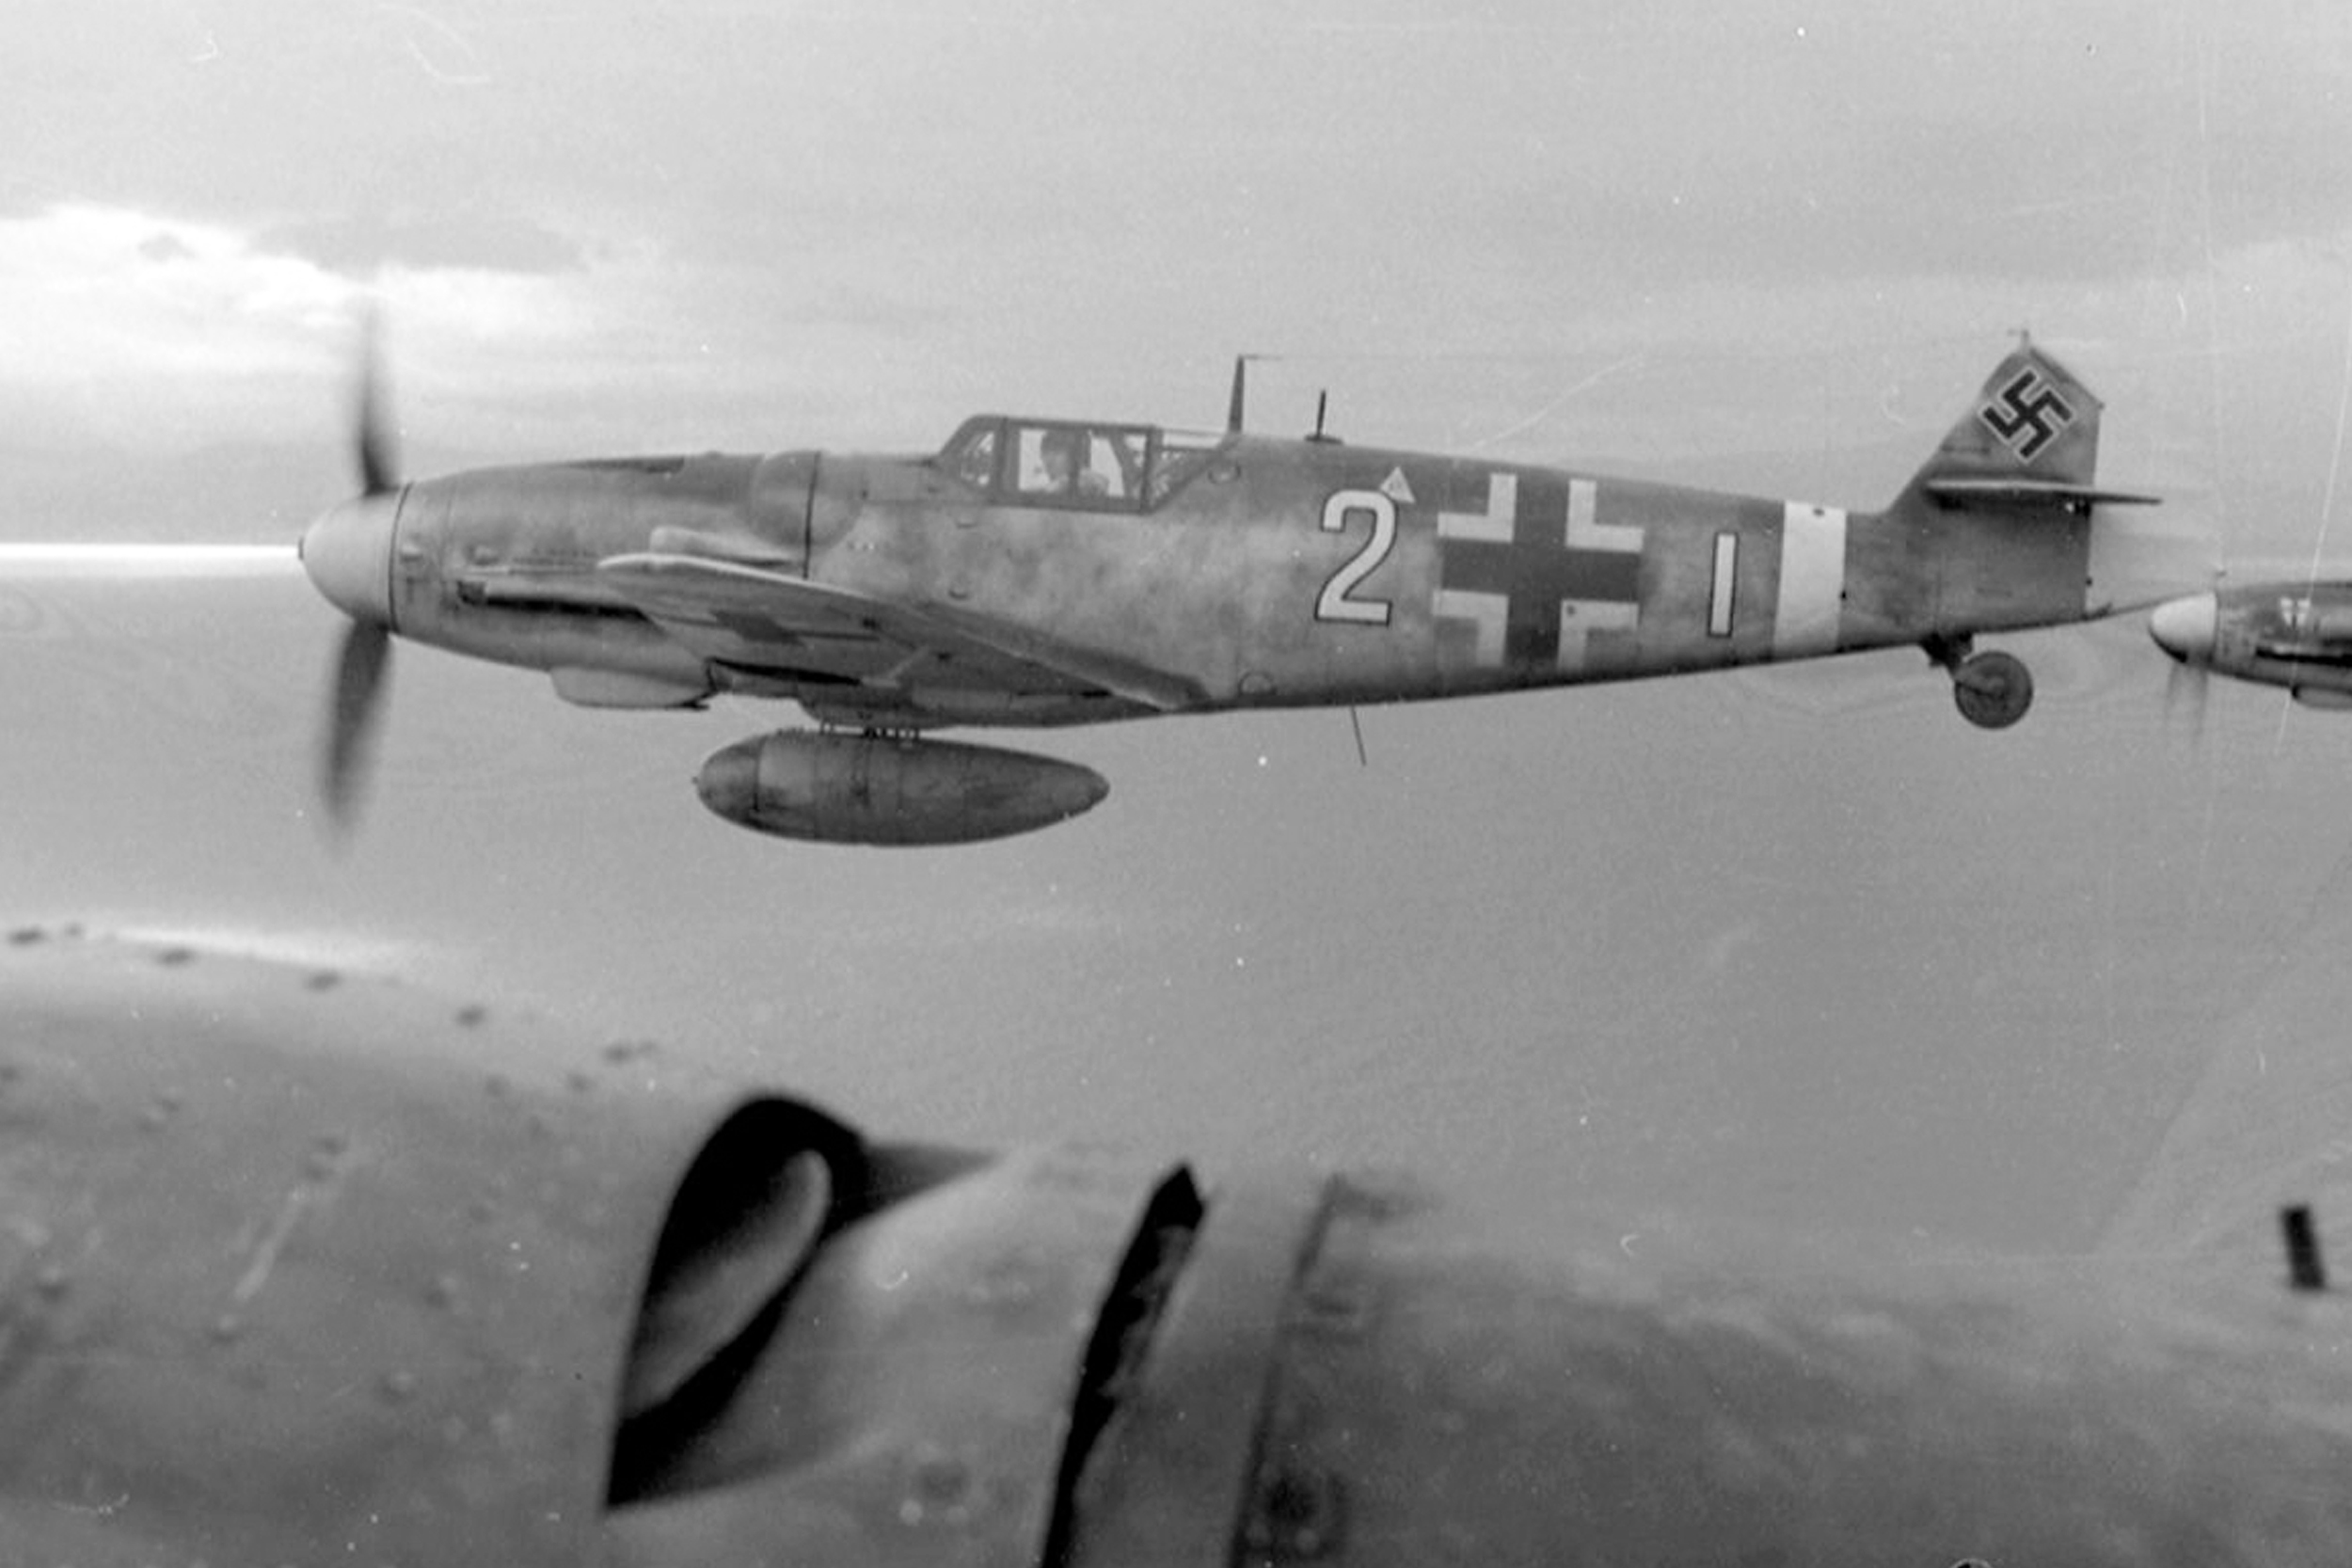 BF-109: The Most Legendary Aircraft of WW2 #shorts #history #ww2